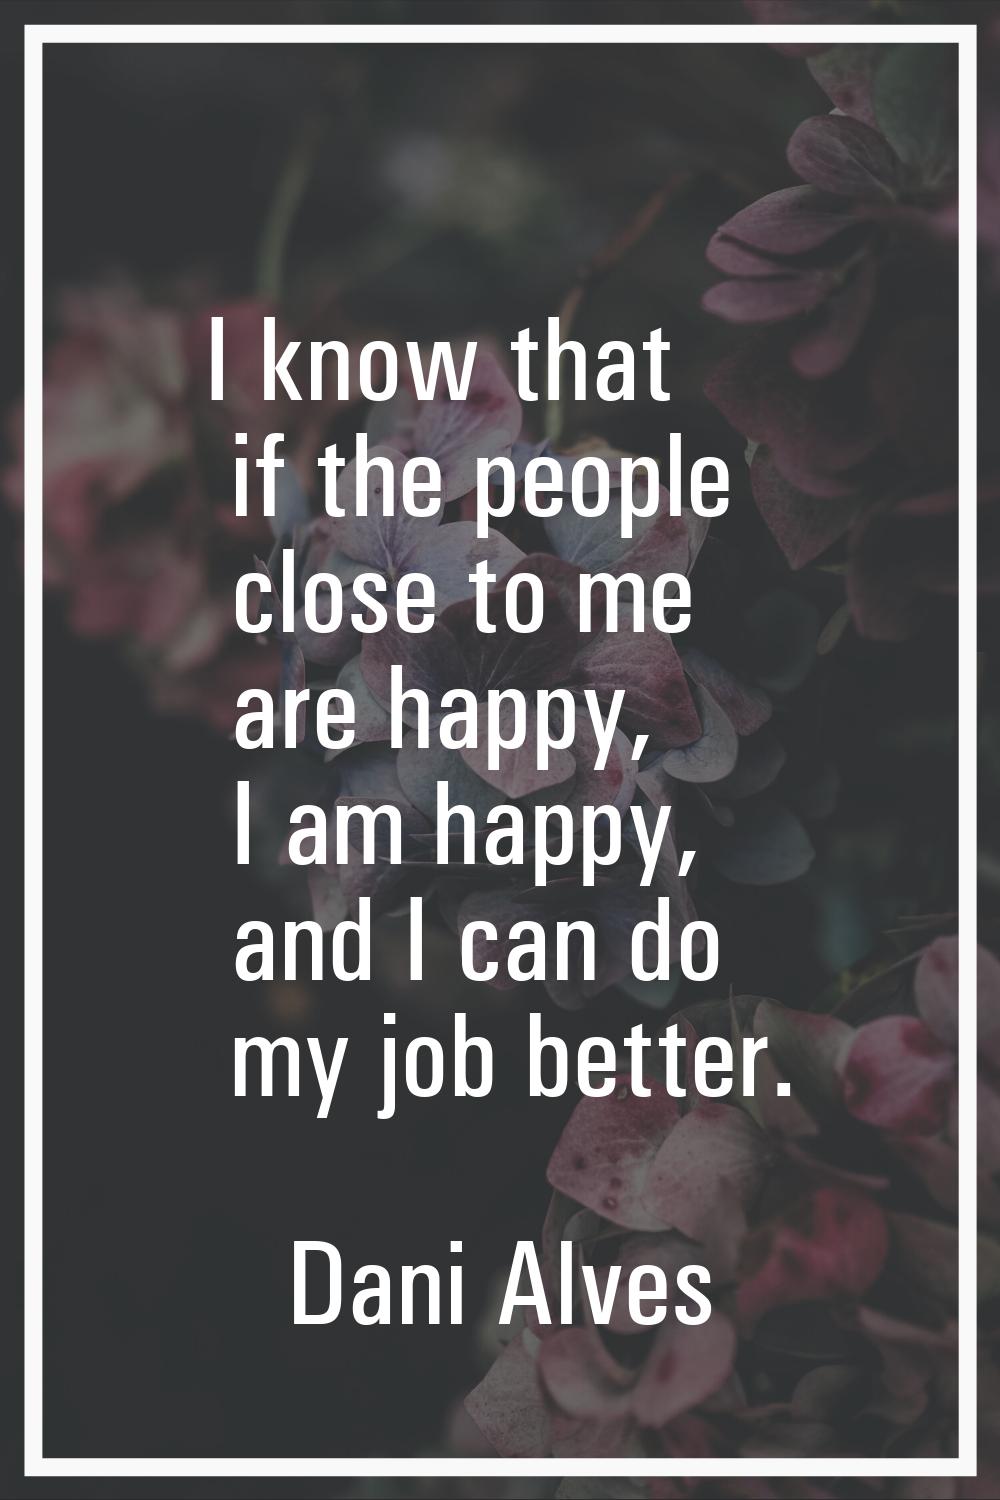 I know that if the people close to me are happy, I am happy, and I can do my job better.